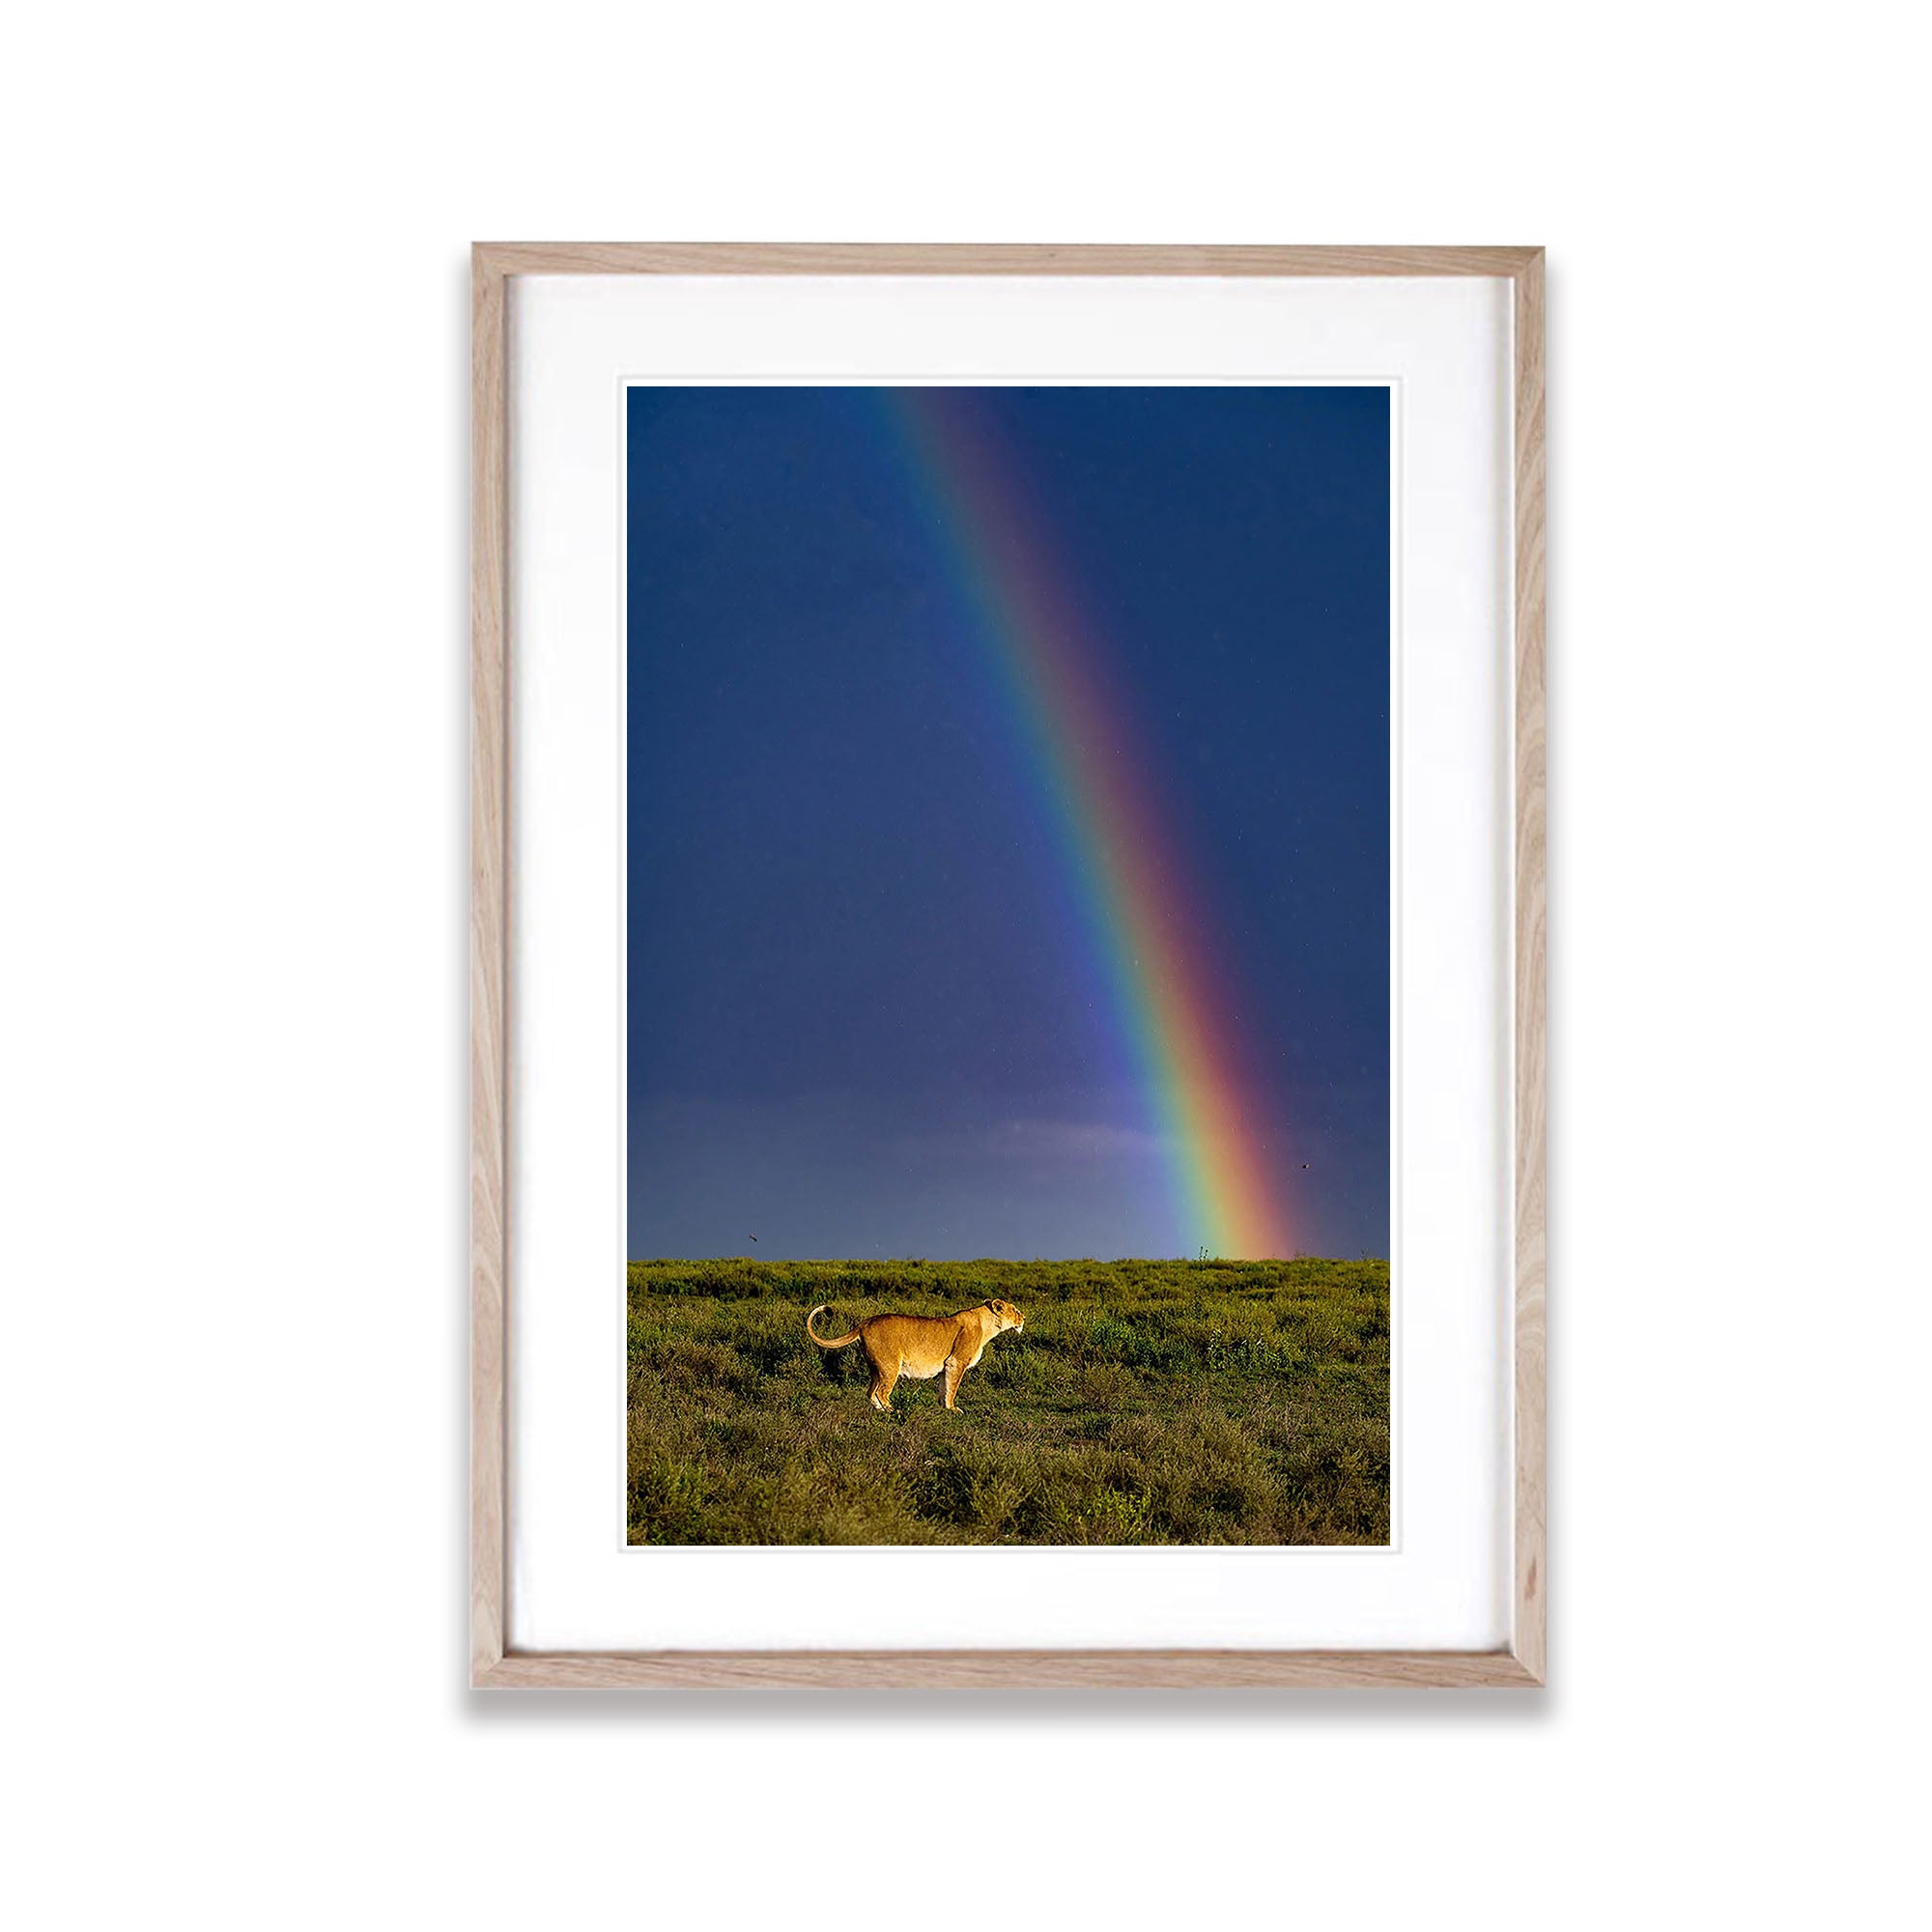 A pregnant lion and rainbow in the Serengeti, Tanzania